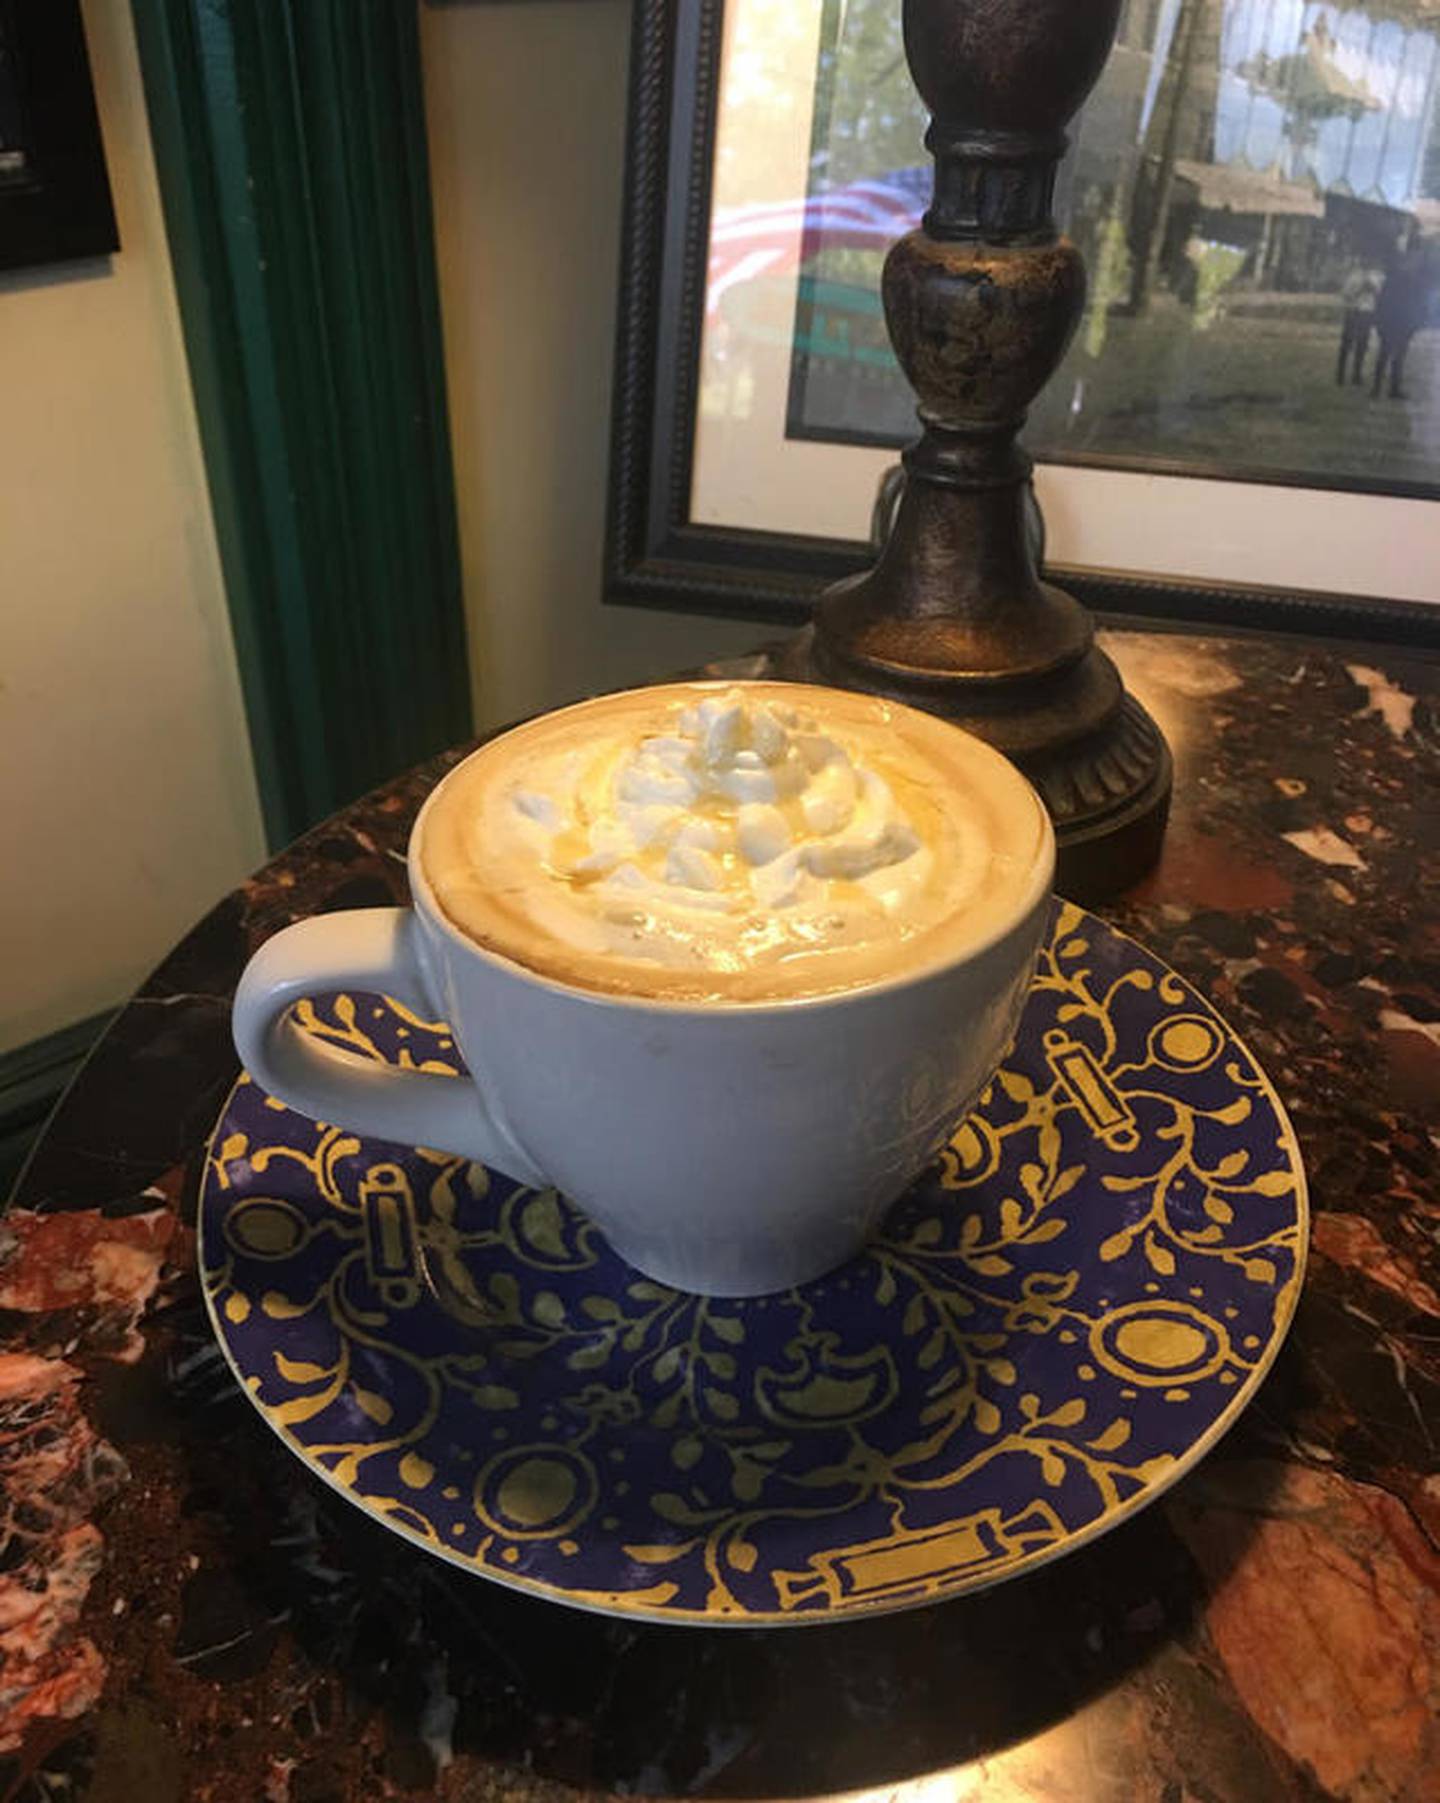 IF YOU GO

WHAT: Jitters

WHEN: 7 a.m. to 3 p.m. Monday thorugh Friday

WHERE: 178 N. Chicago St. Joliet

INFORMATION: Call 815-740-0048 or visit Jitters on Facebook.

Pictured above: hot vanilla chai latte